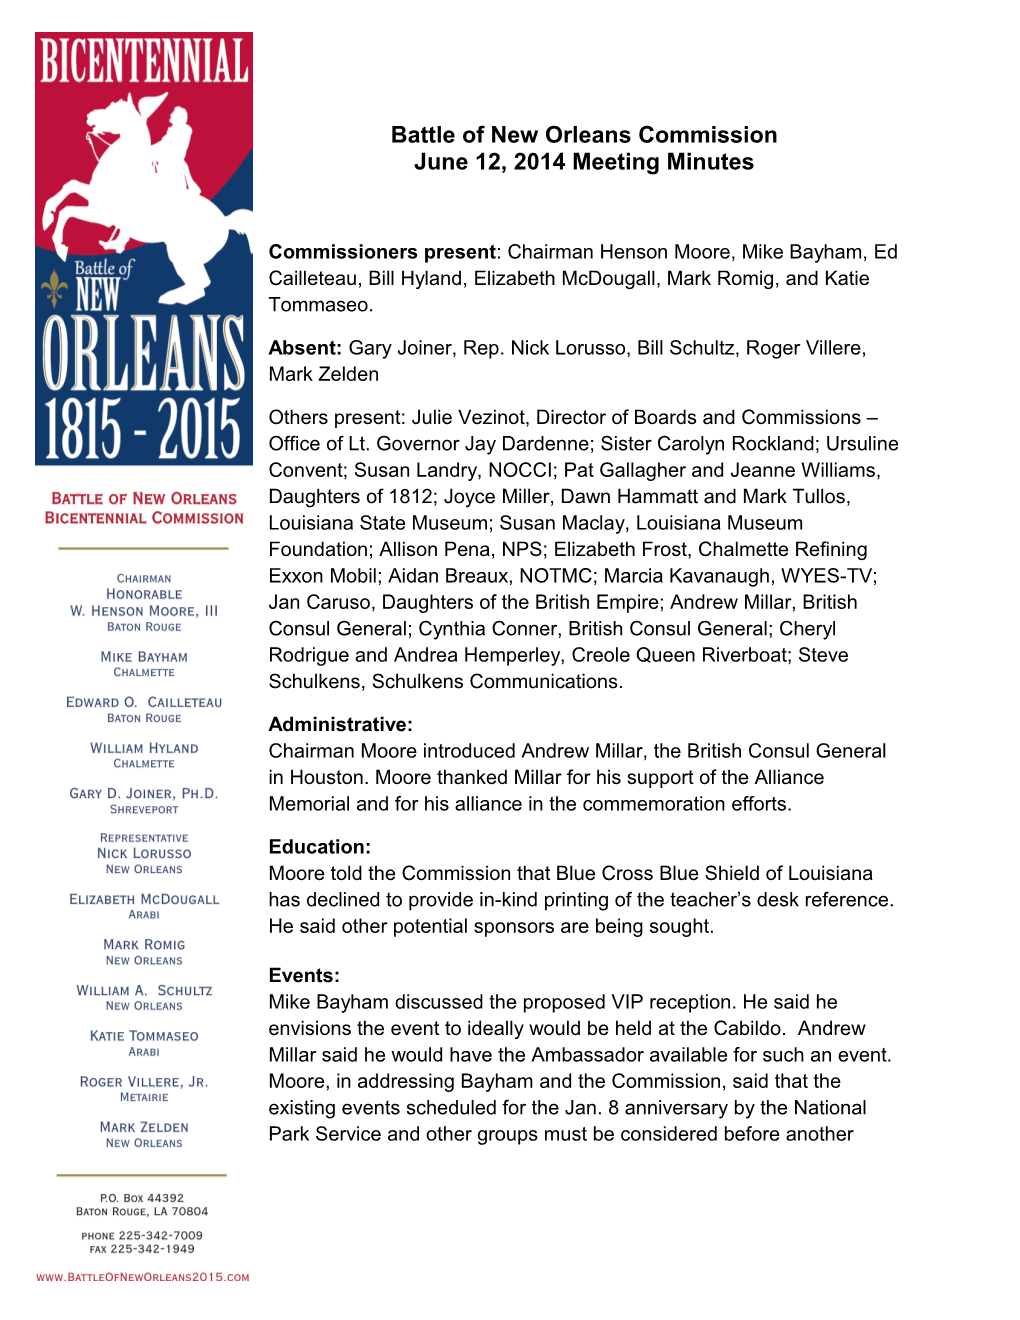 Battle of New Orleans Commission June 12, 2014 Meeting Minutes